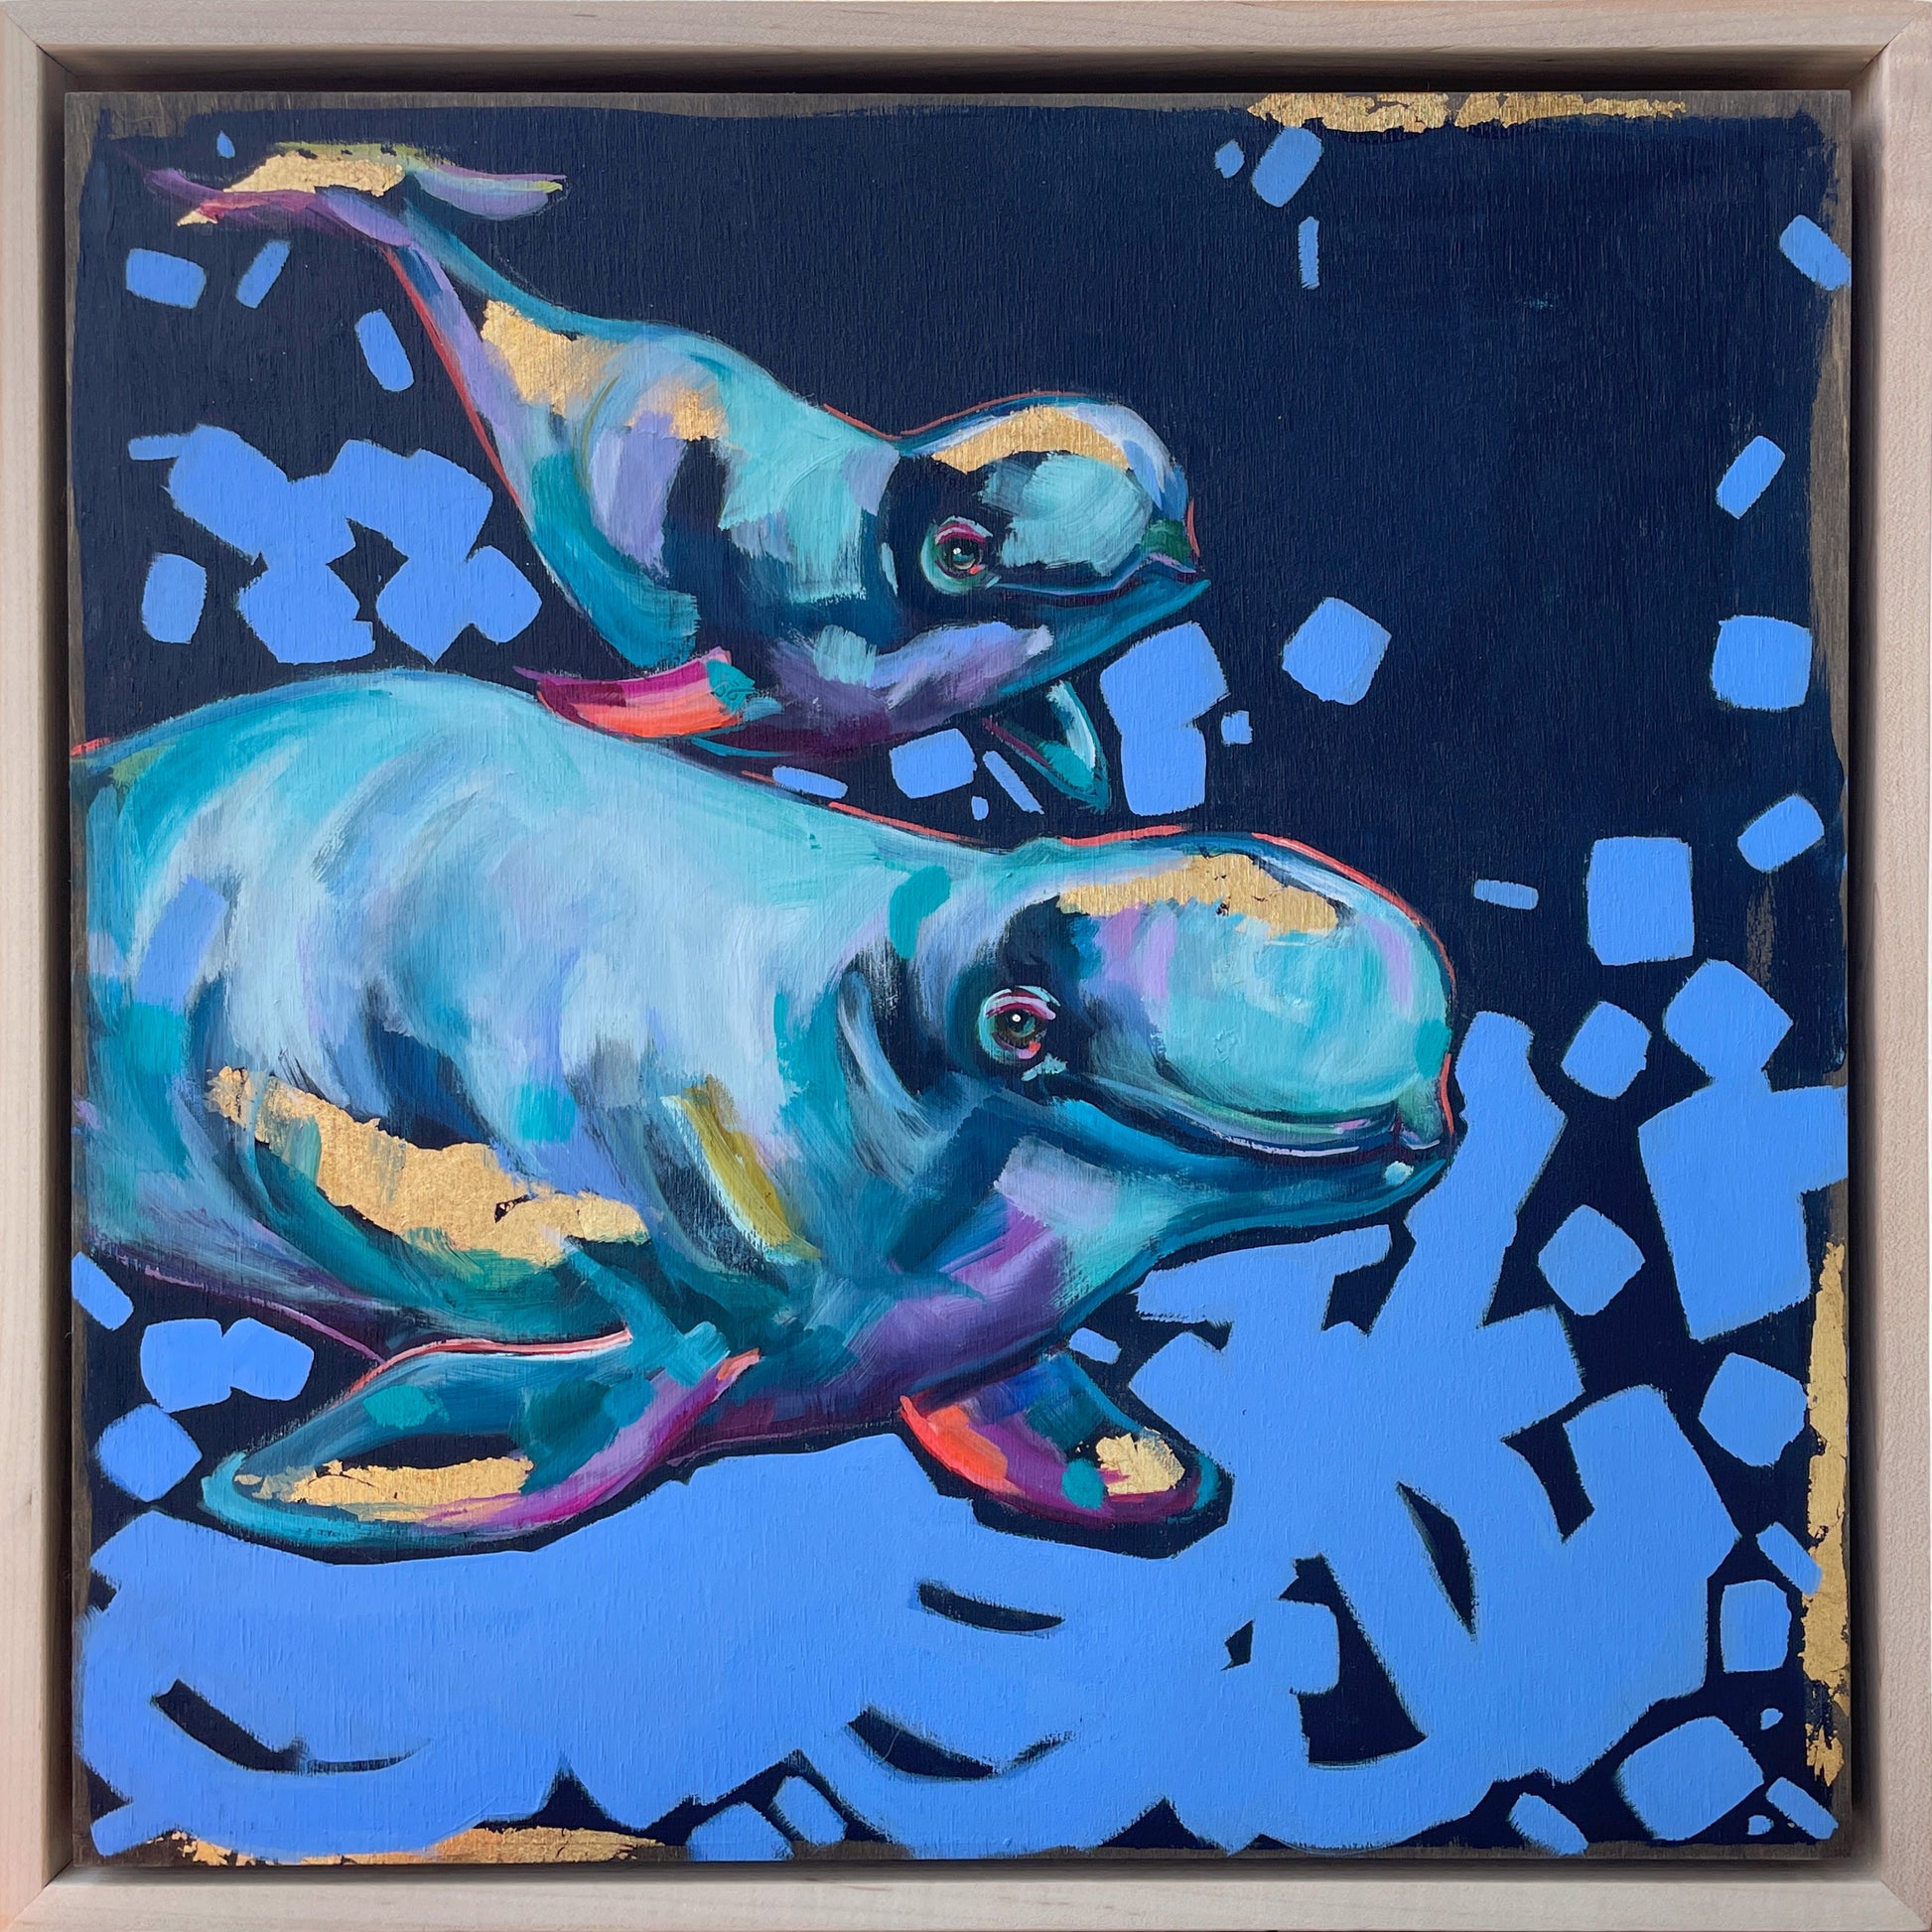 Oil painting of abstract whales in blue shades with gold leaf detail titled 'Everything Whale be Alright' by Shaney Watters